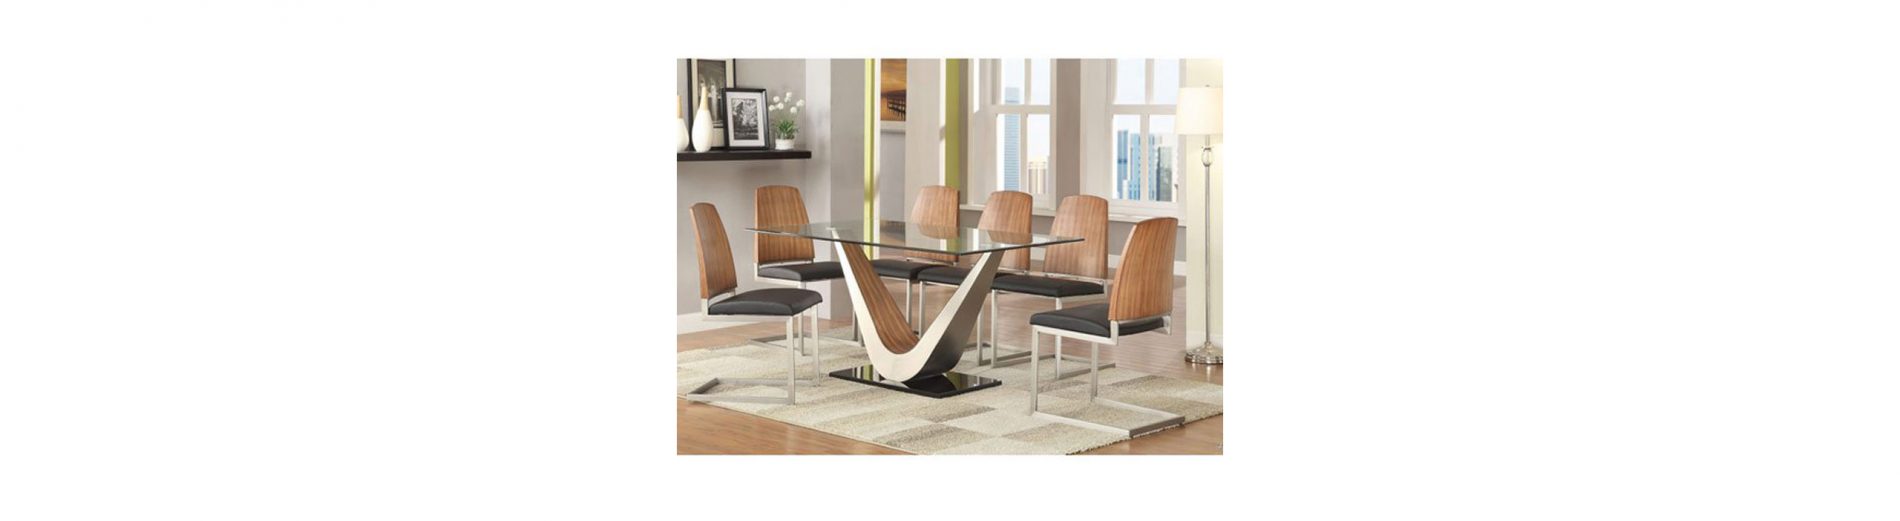 Considerations On Trendy Dining Furniture